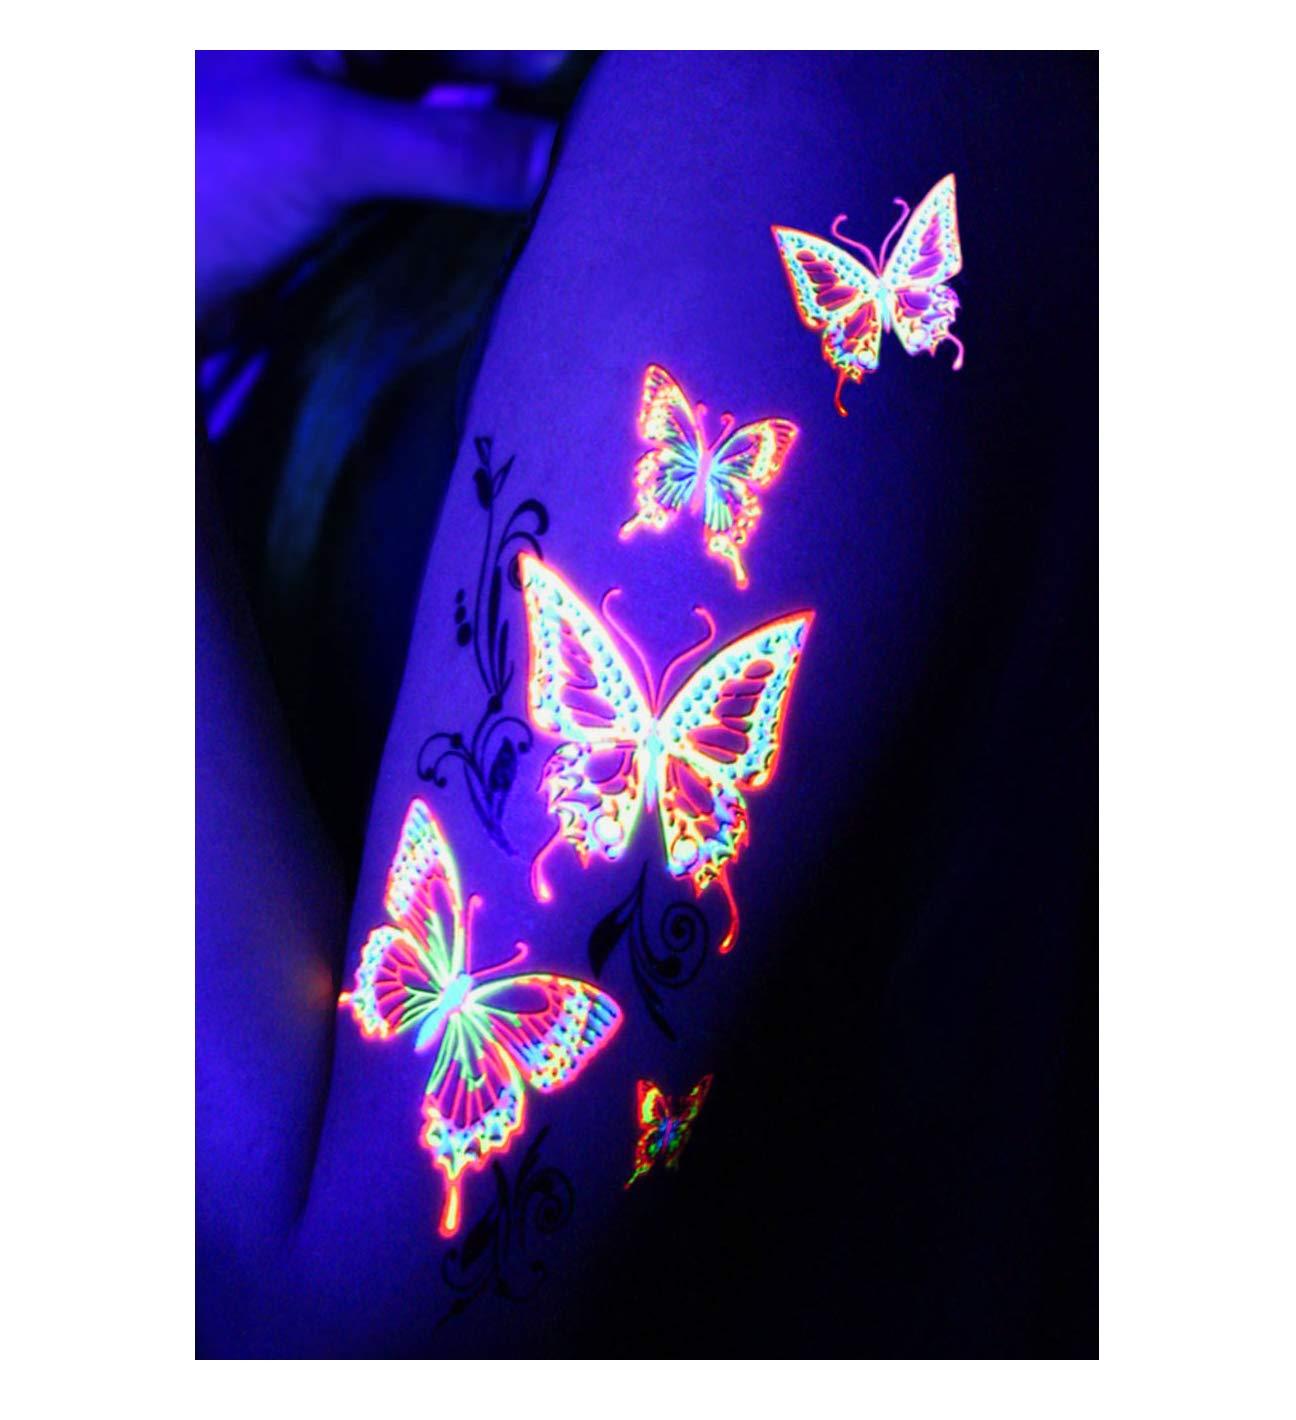 glow in the dark markers For Wonderful Artistic Activities